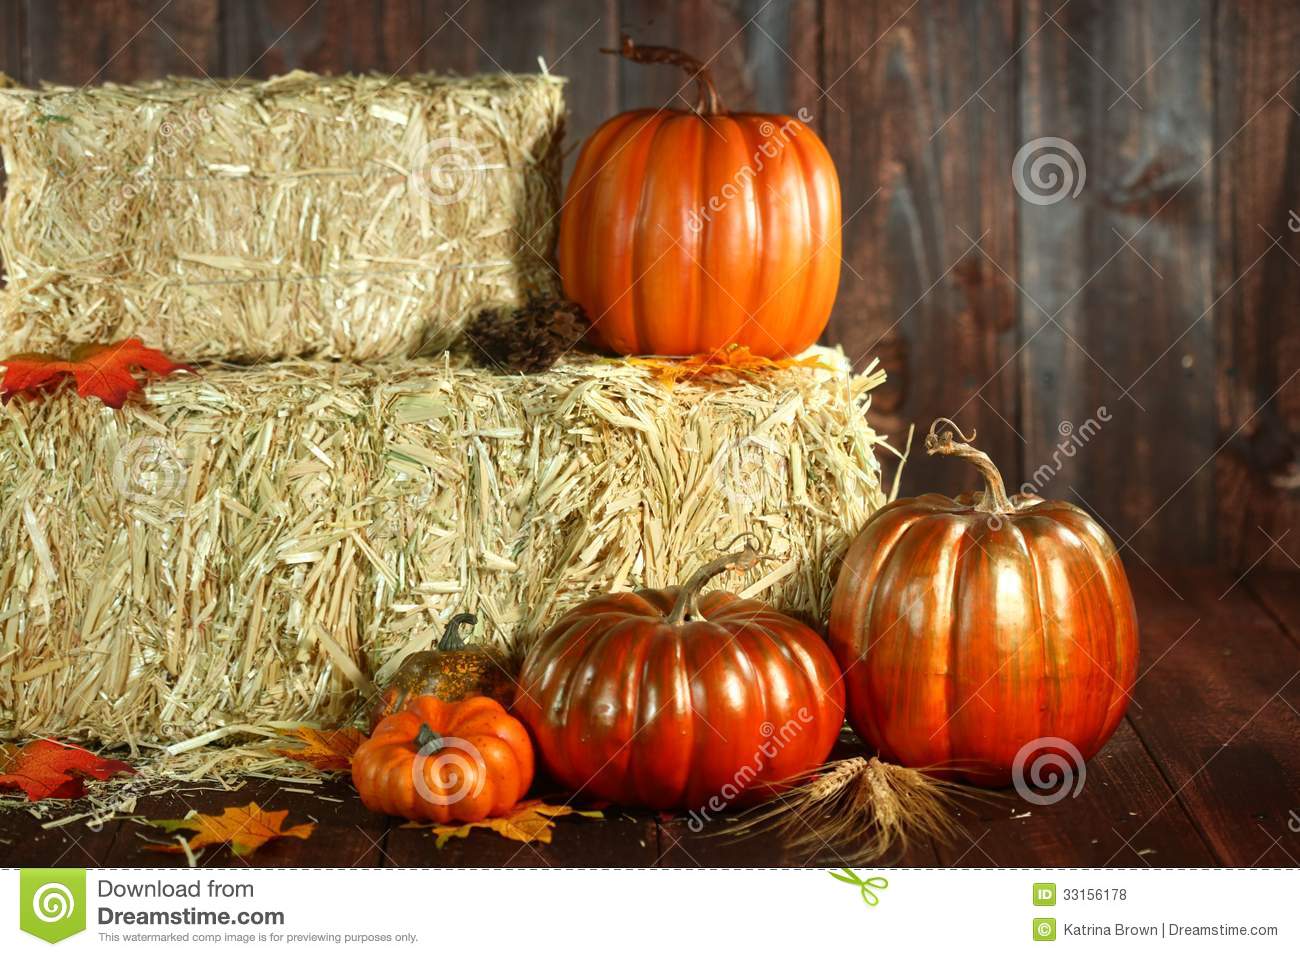 Fall Scene With Pumpkins Themed